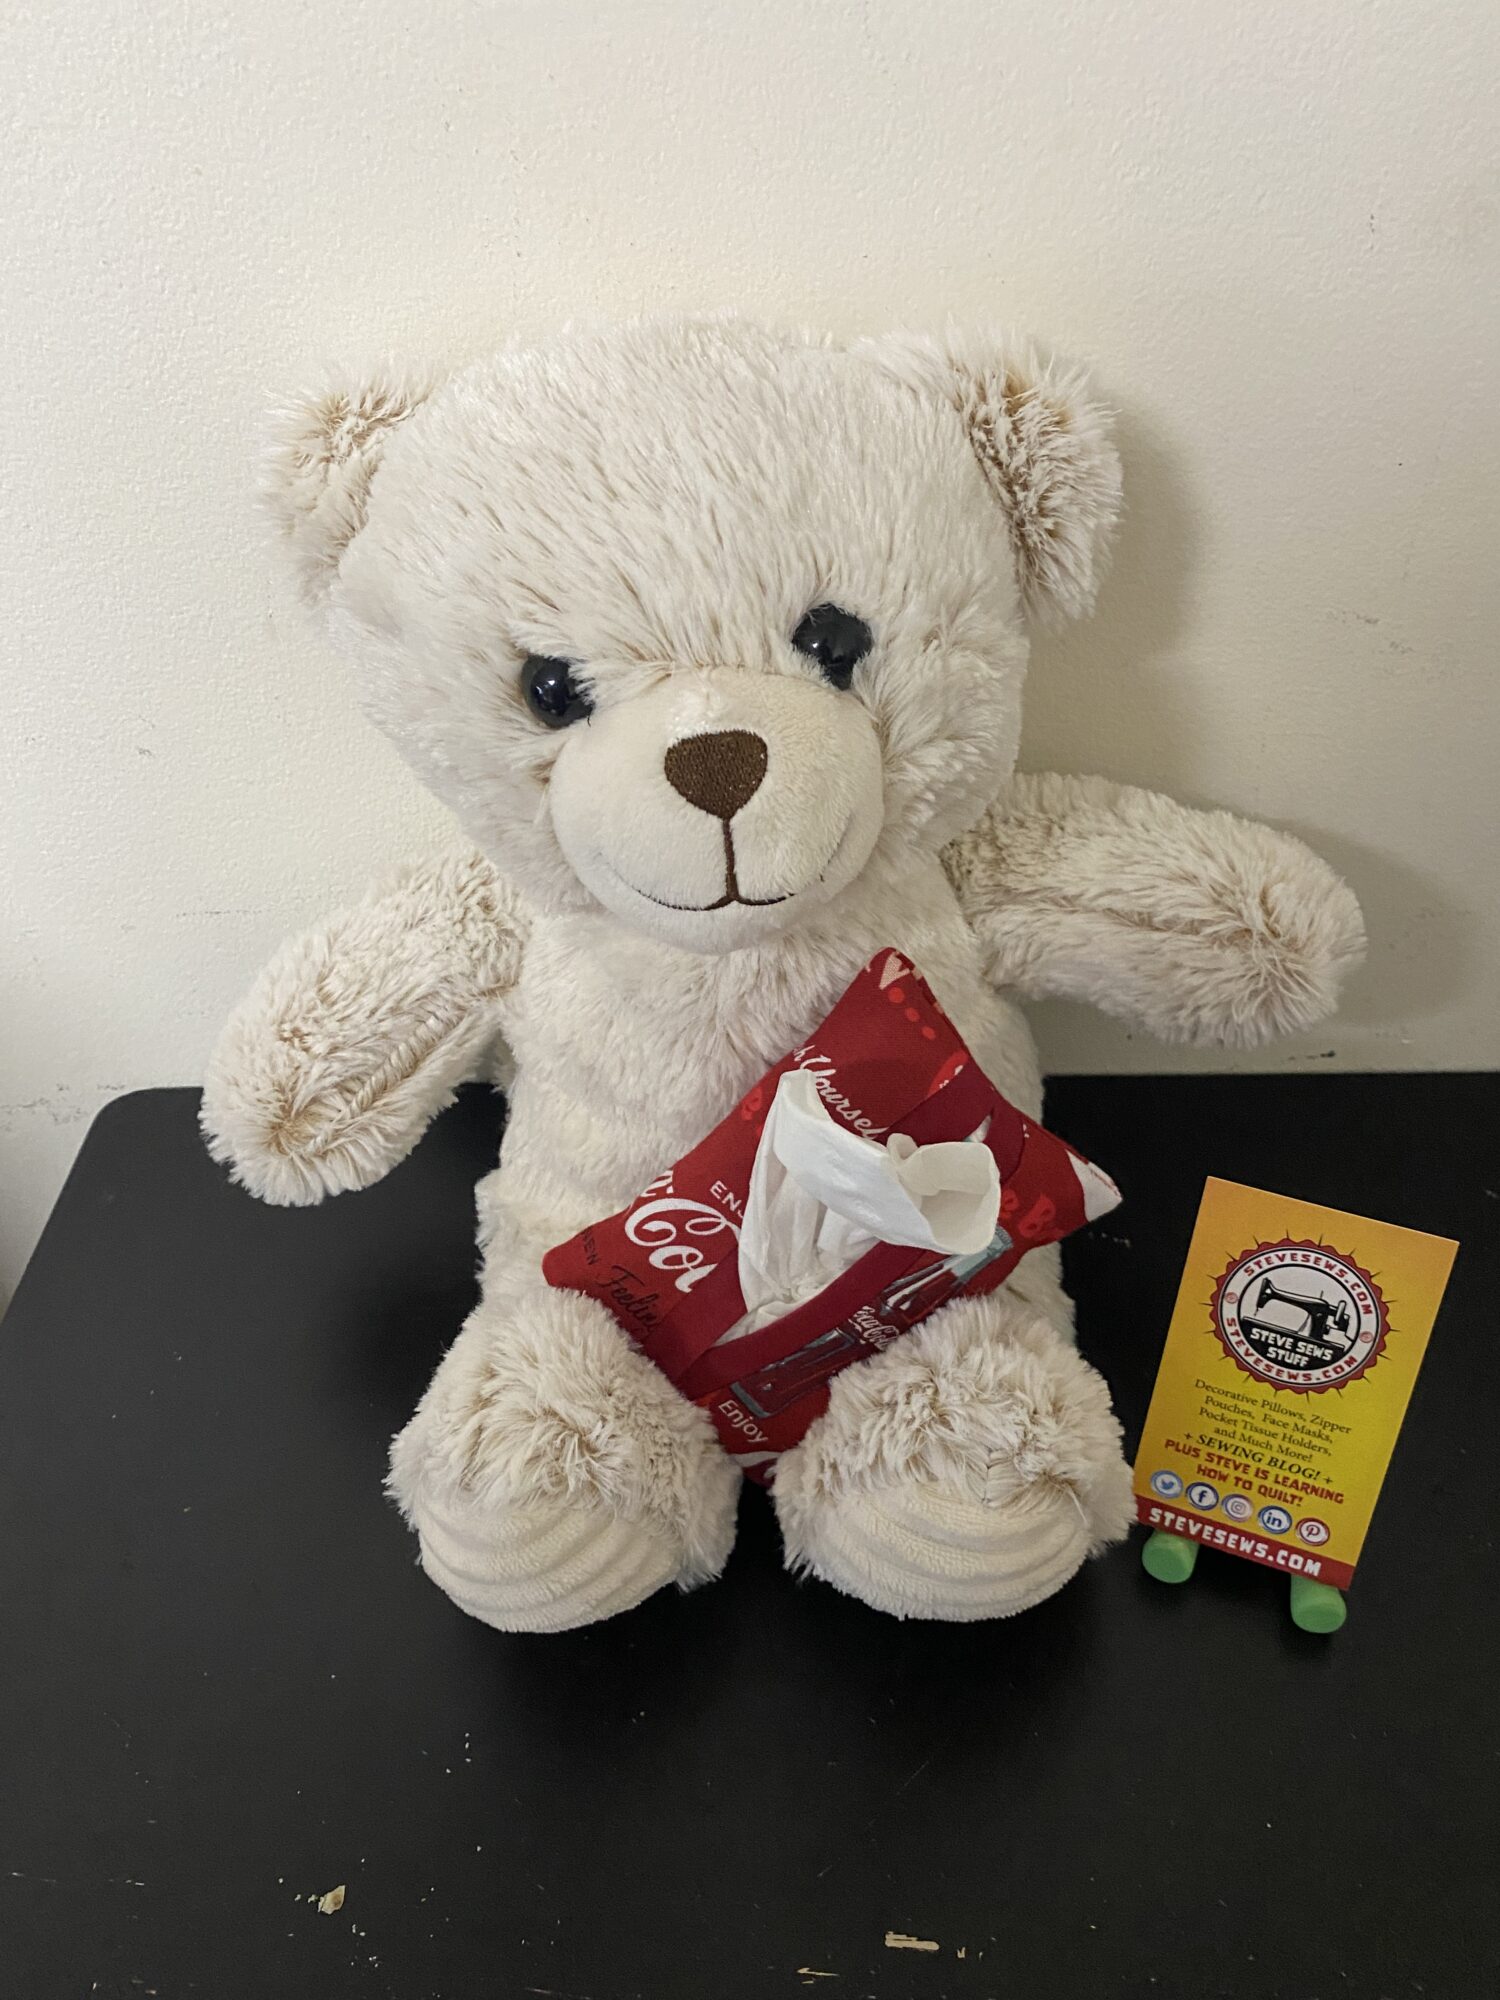 Meet Miriam Esther a teddy bear. #teddybear #bear Miriam Esther is a Co-Stratgegy Officer. (Along with Lucas) She is holding the Coke Pocket Tissue Holder – A Coke-themed pocket tissue holder. #Coke #cocacola #cokecola #cocacolalife